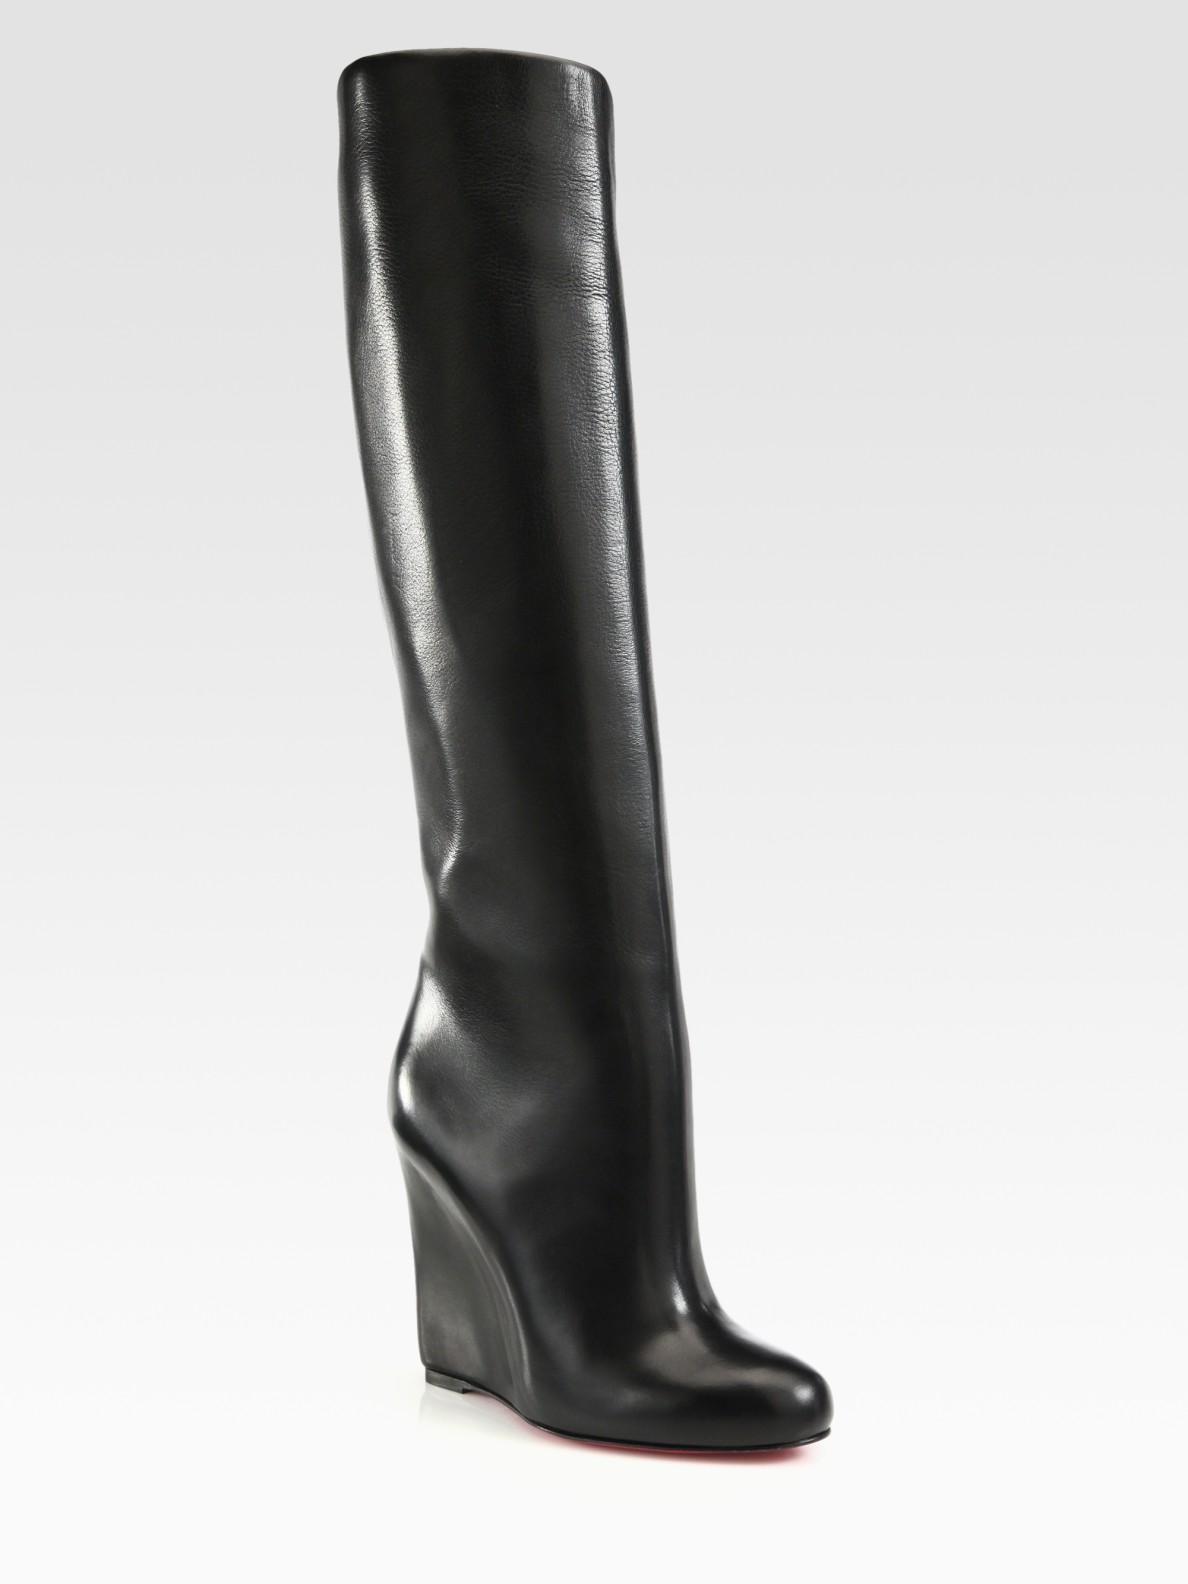 black leather christian louboutin boots - Catholic Commission for ...